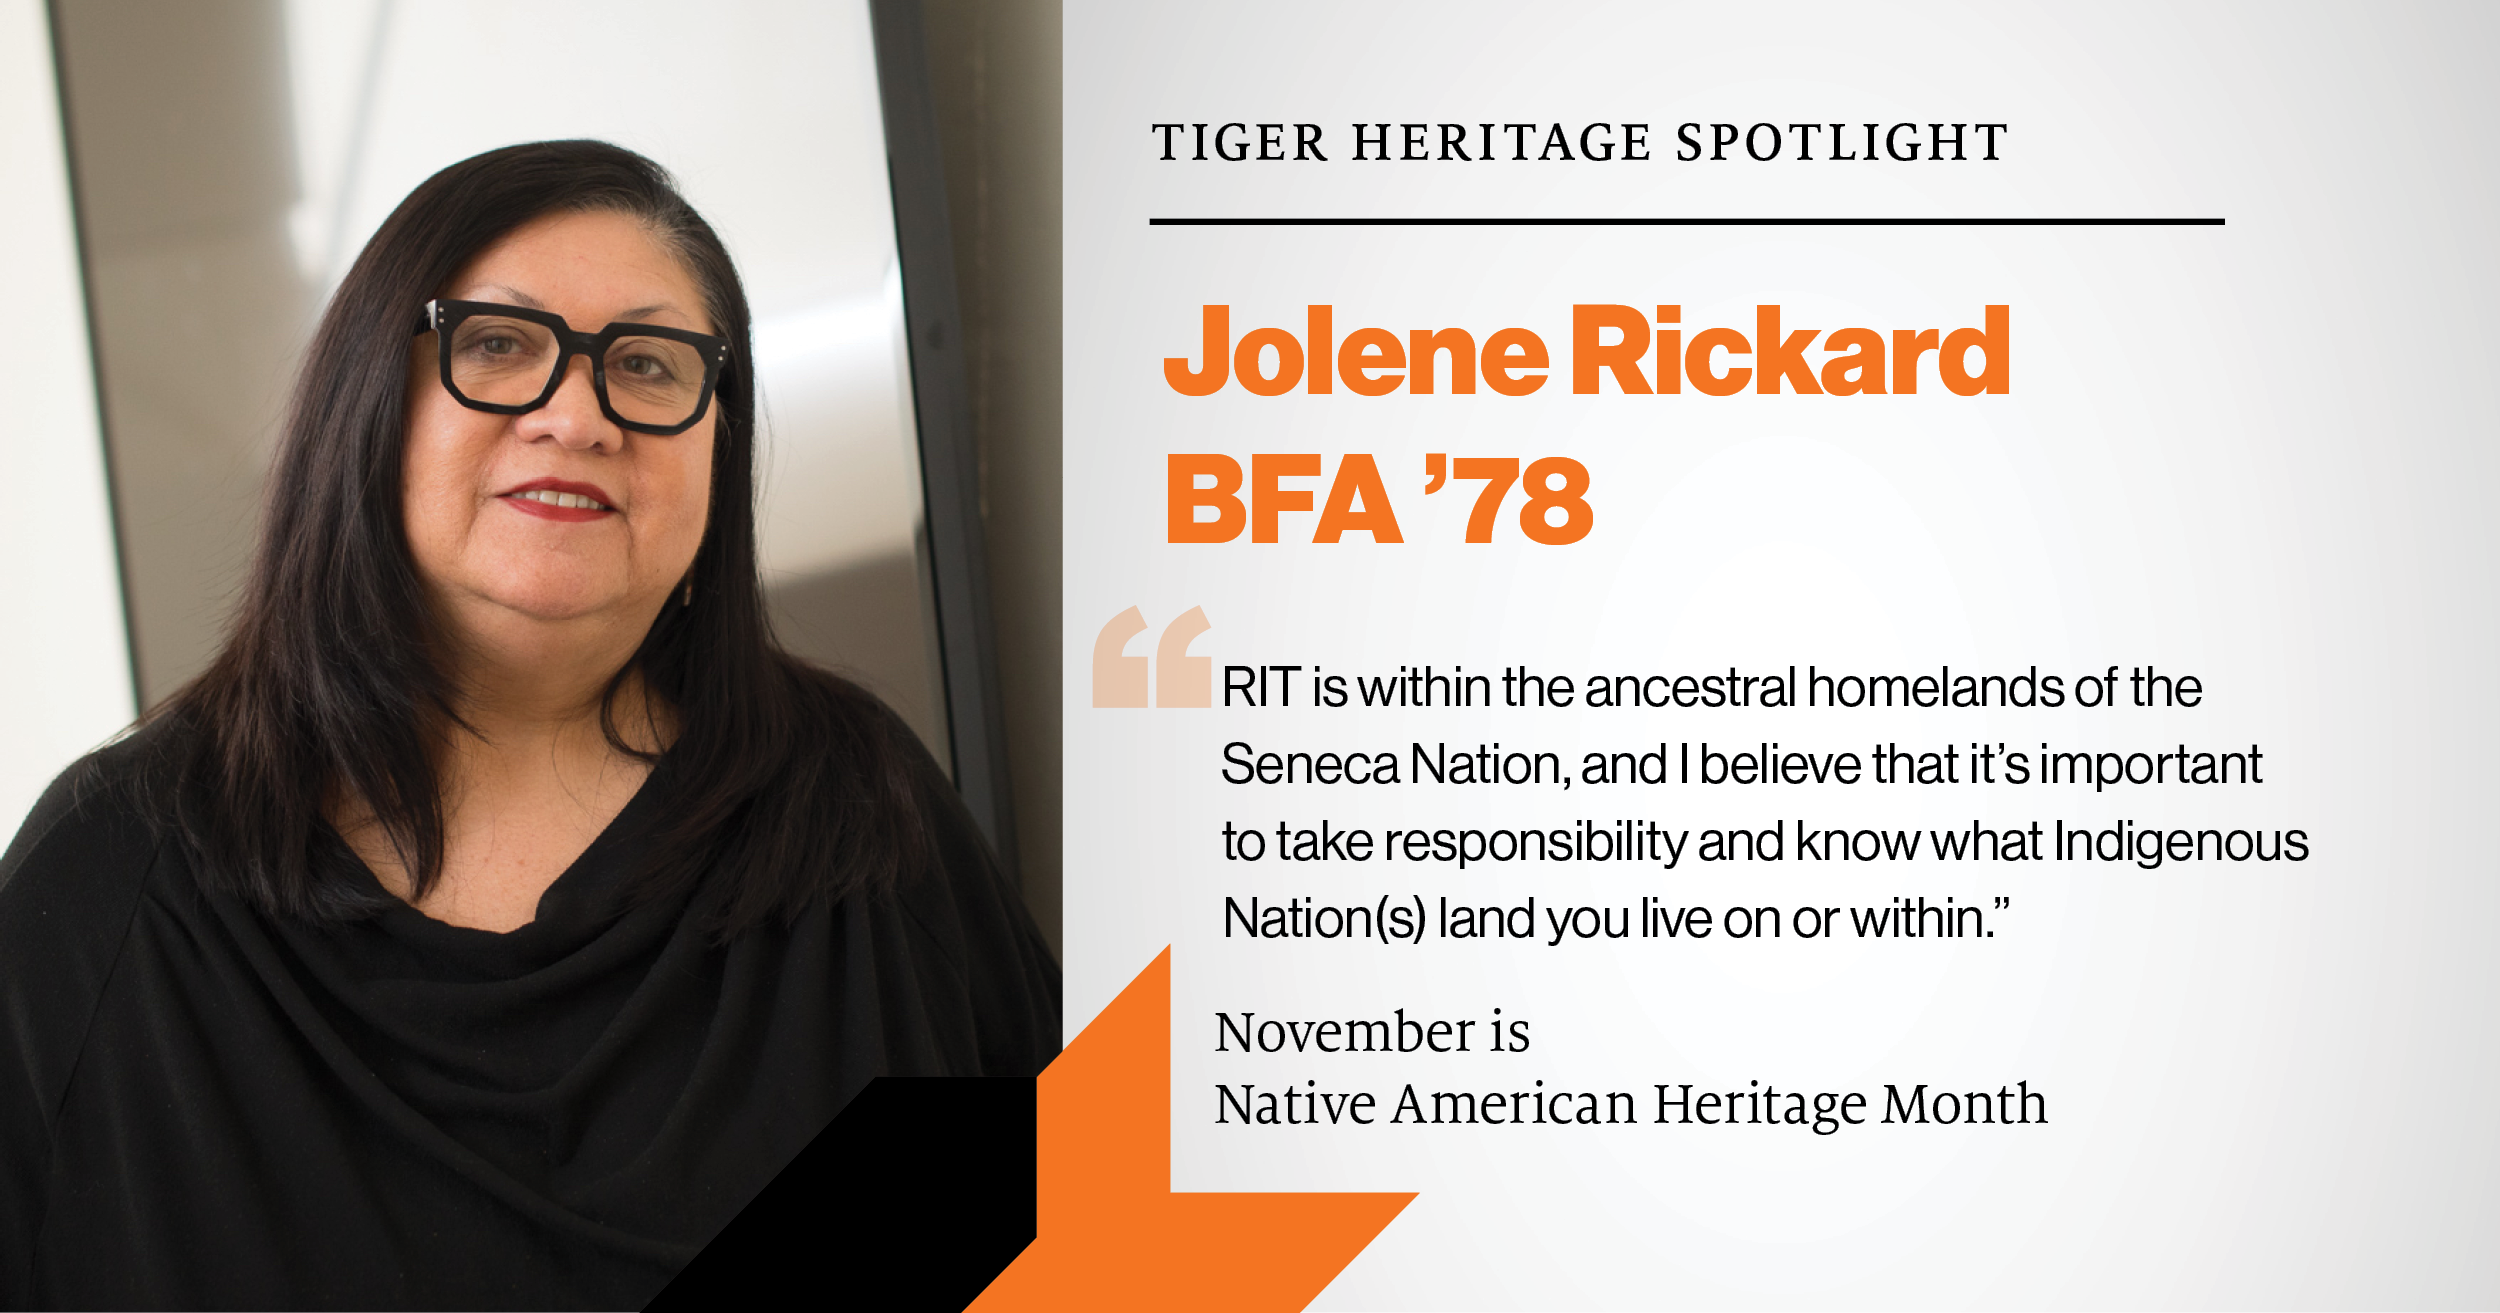 Tiger Heritage Spotlight Jolene Rickard BFA '78 RIT is within the ancestral homelands of the Seneca Nation, and I believe that it's important to take responsibility and know what Indigenous Nation(s) land you live on or within. November is Native American Heritage Month